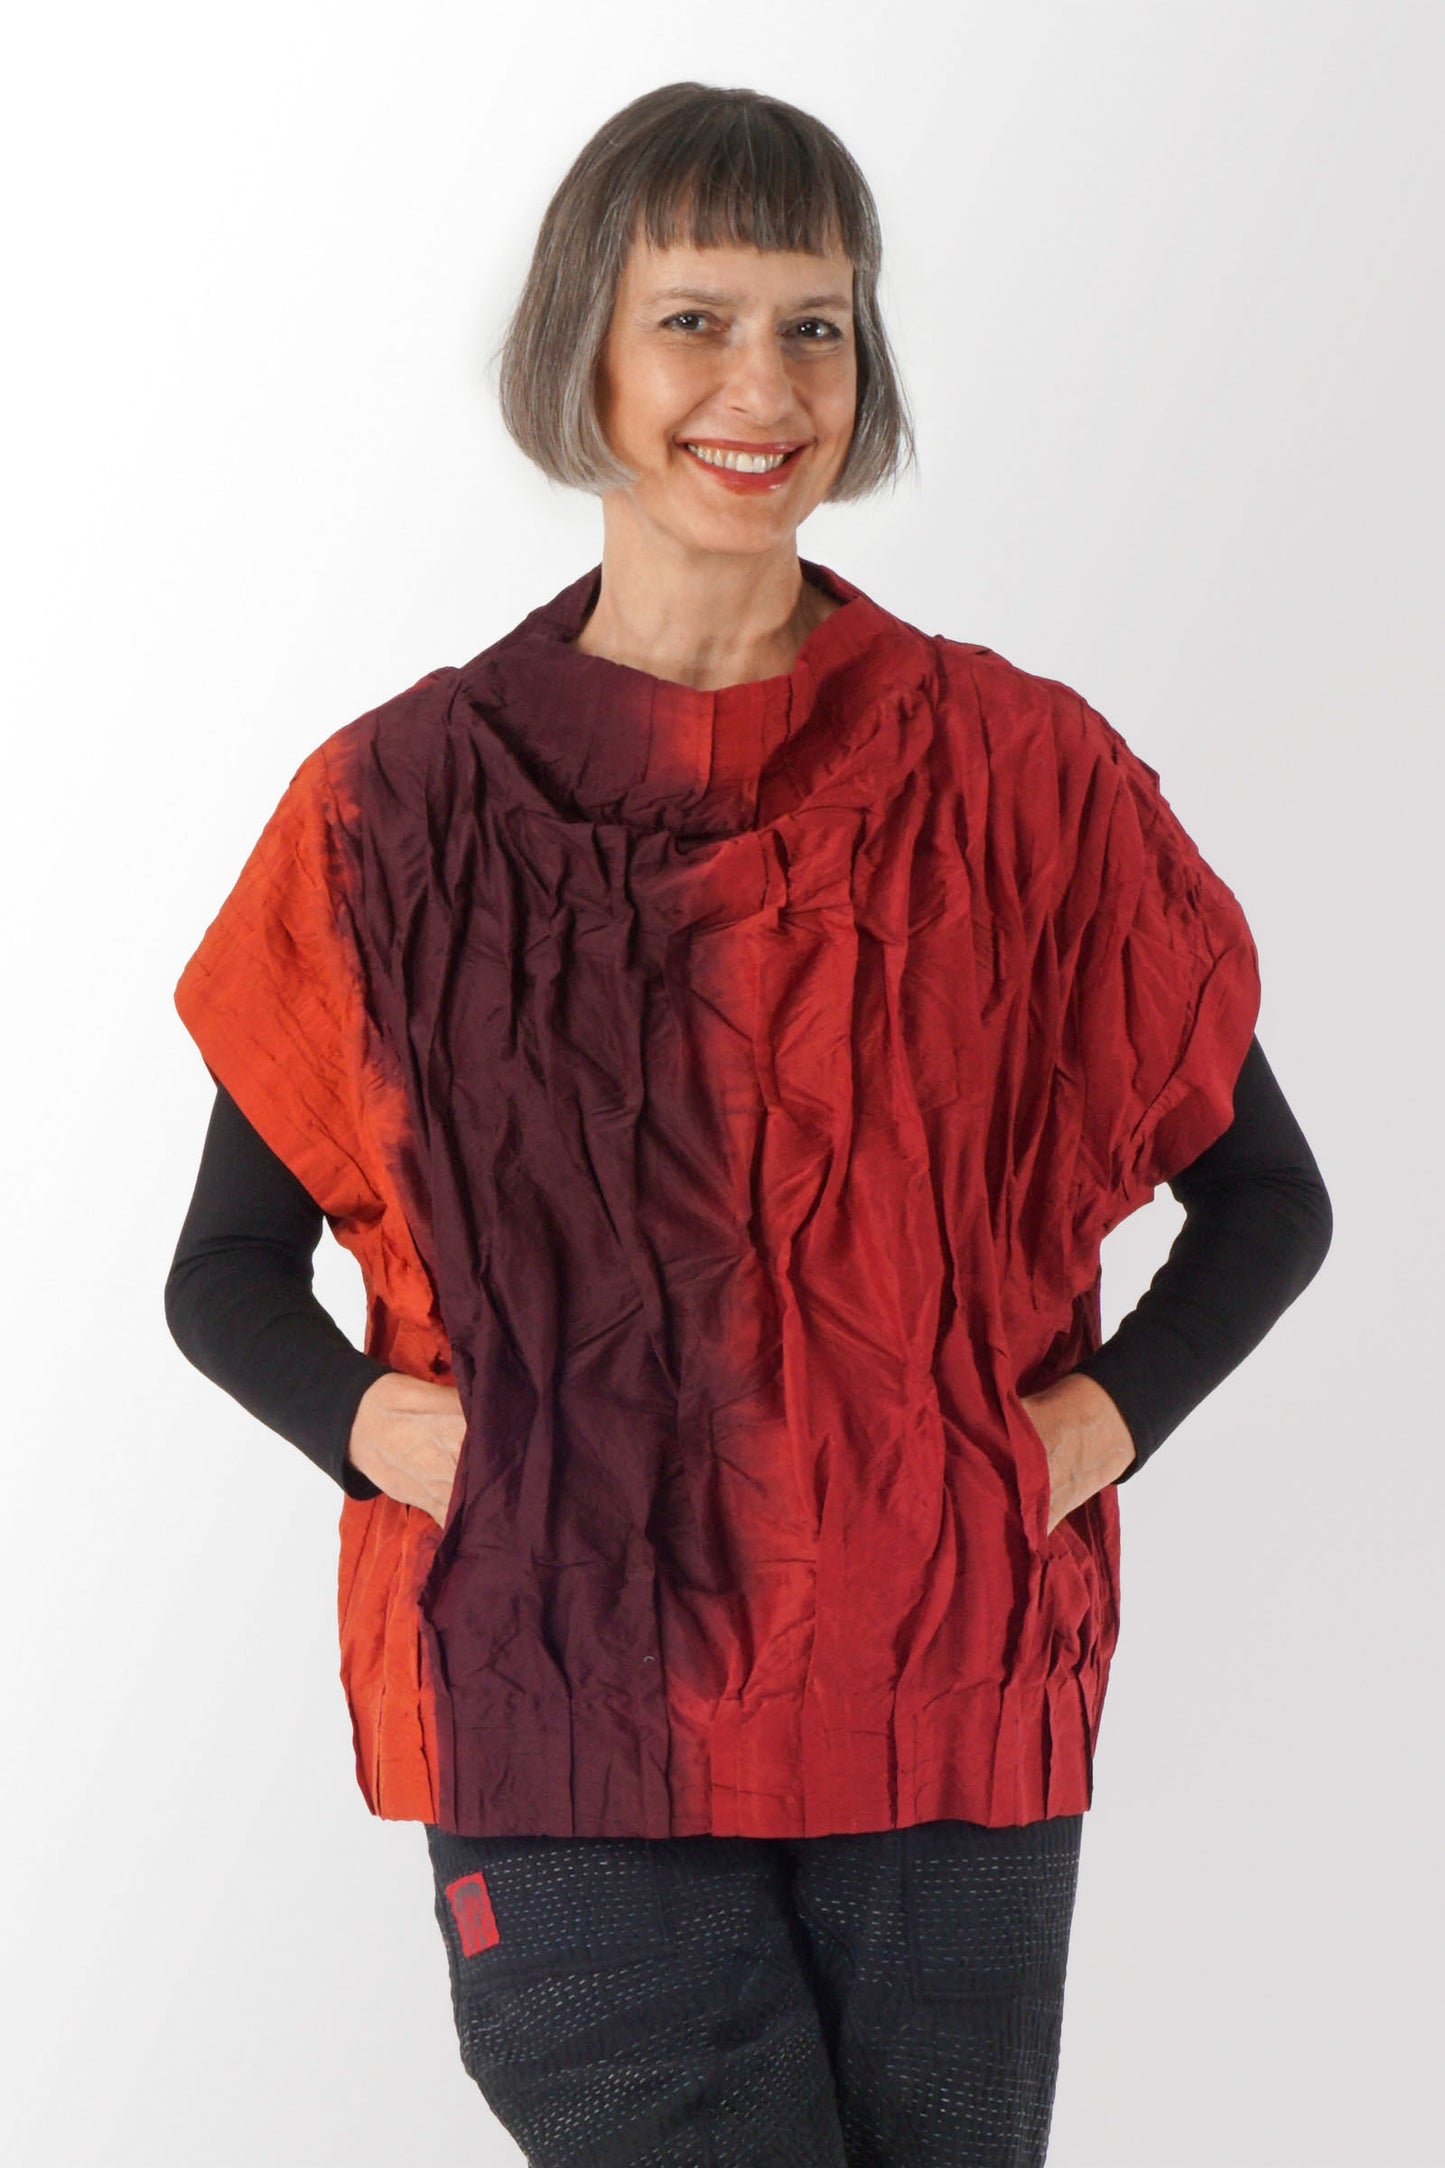 DYED COTTON SILK HEAVY VOILE WAVY TUCK PULLOVER VEST - dh1242-ord -